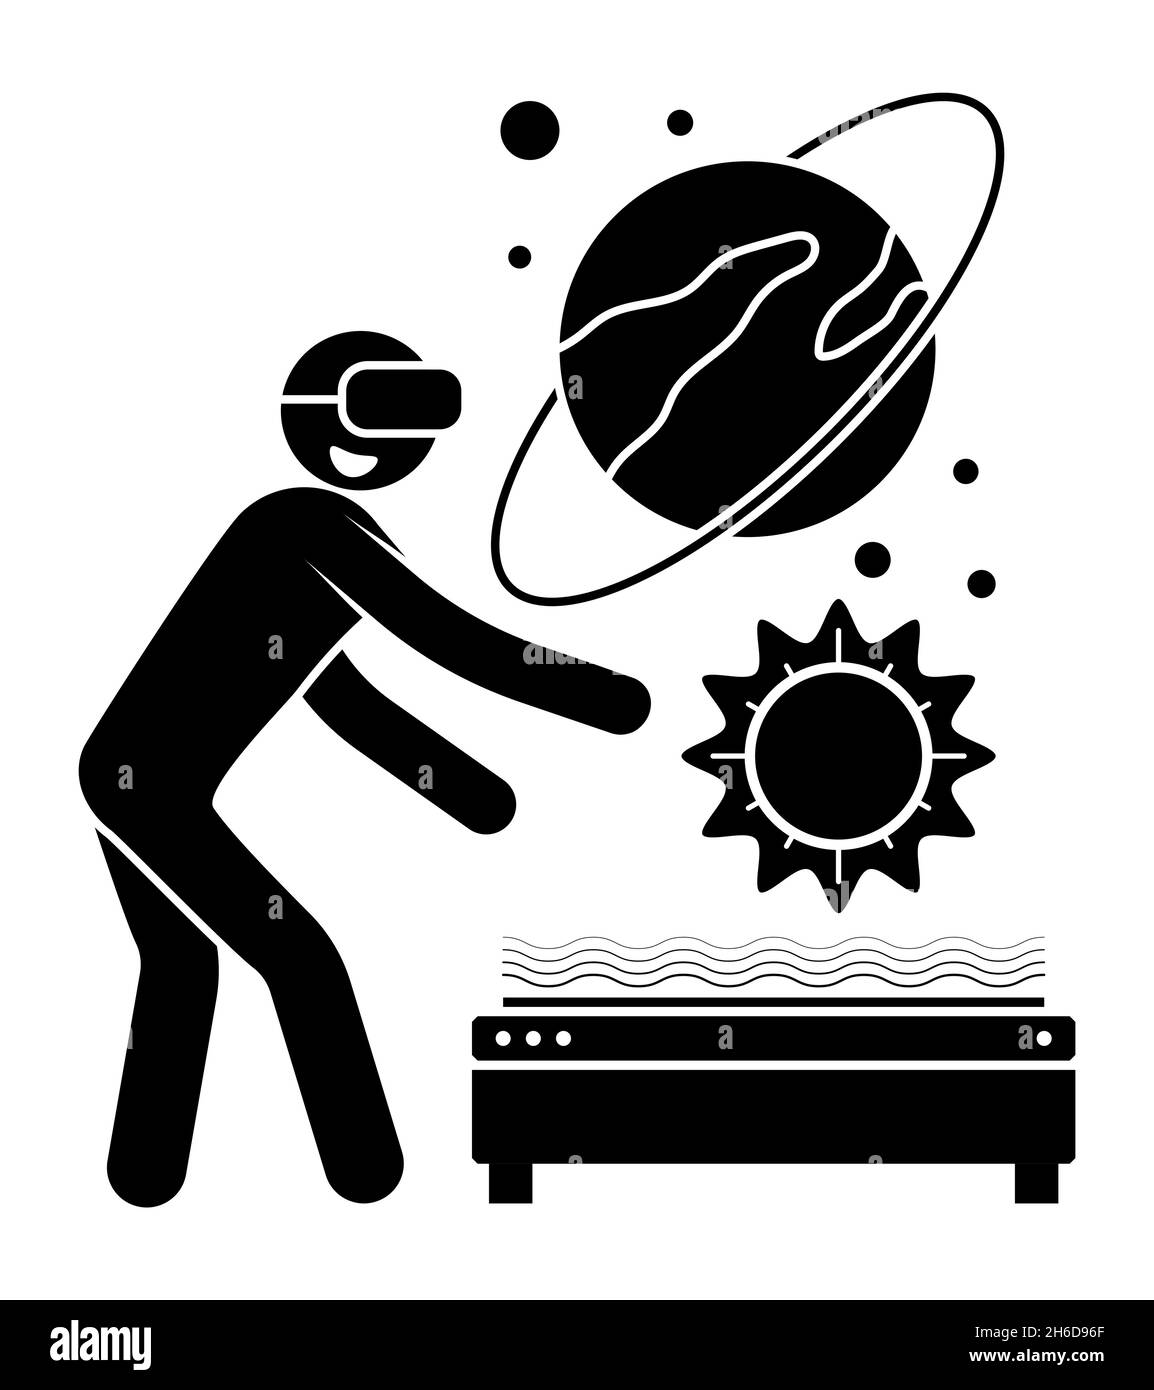 stick man figure, student, scientist in virtual reality glasses looks at solar system. High technologies in modern education. Simple black and white v Stock Vector